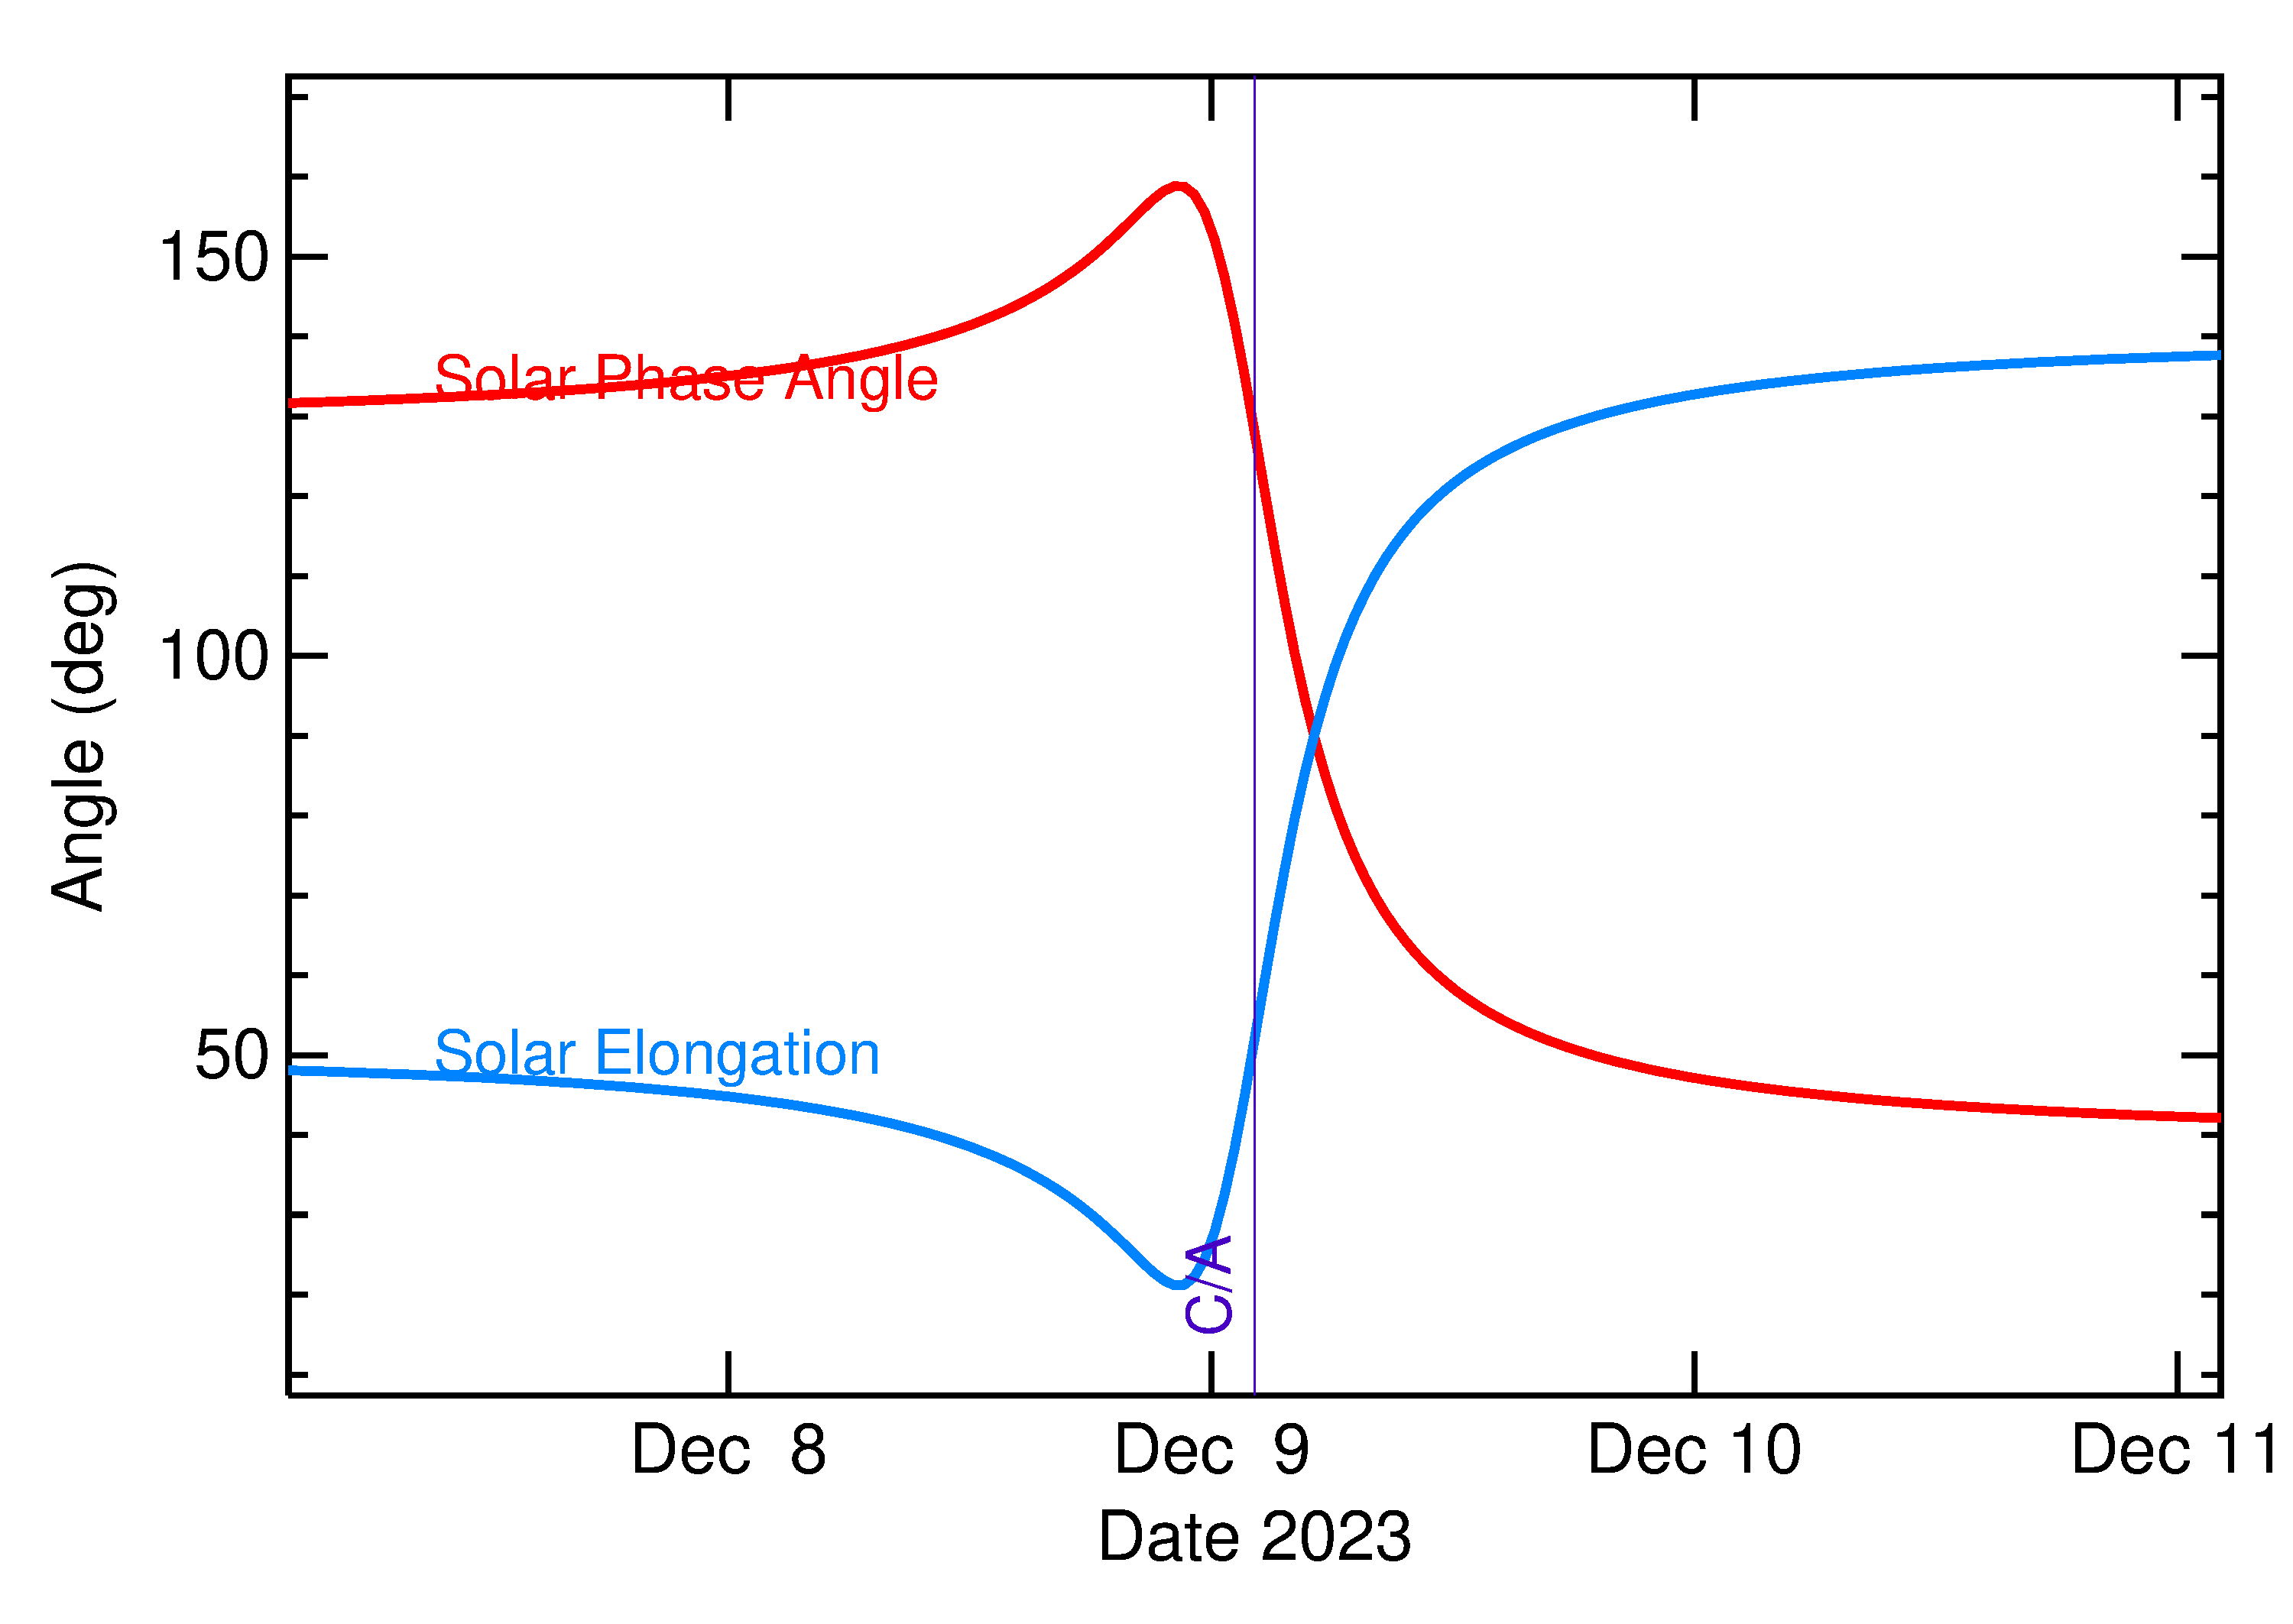 Solar Elongation and Solar Phase Angle of 2023 XW5 in the days around closest approach